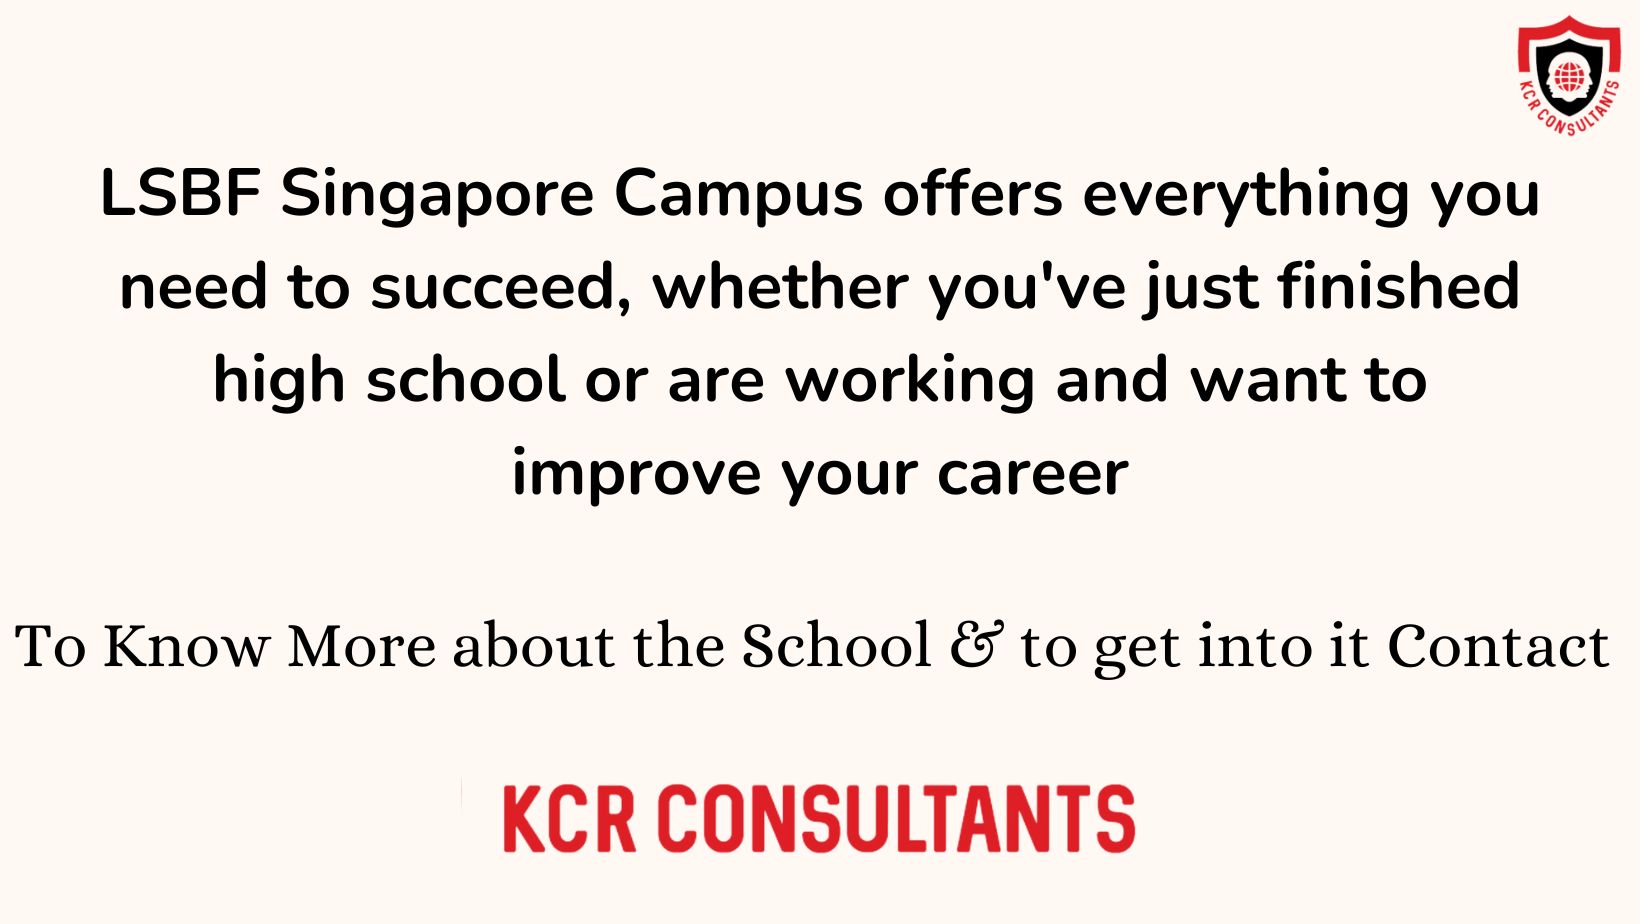 LSBF Singapore - KCR CONSULTANTS - Contact us